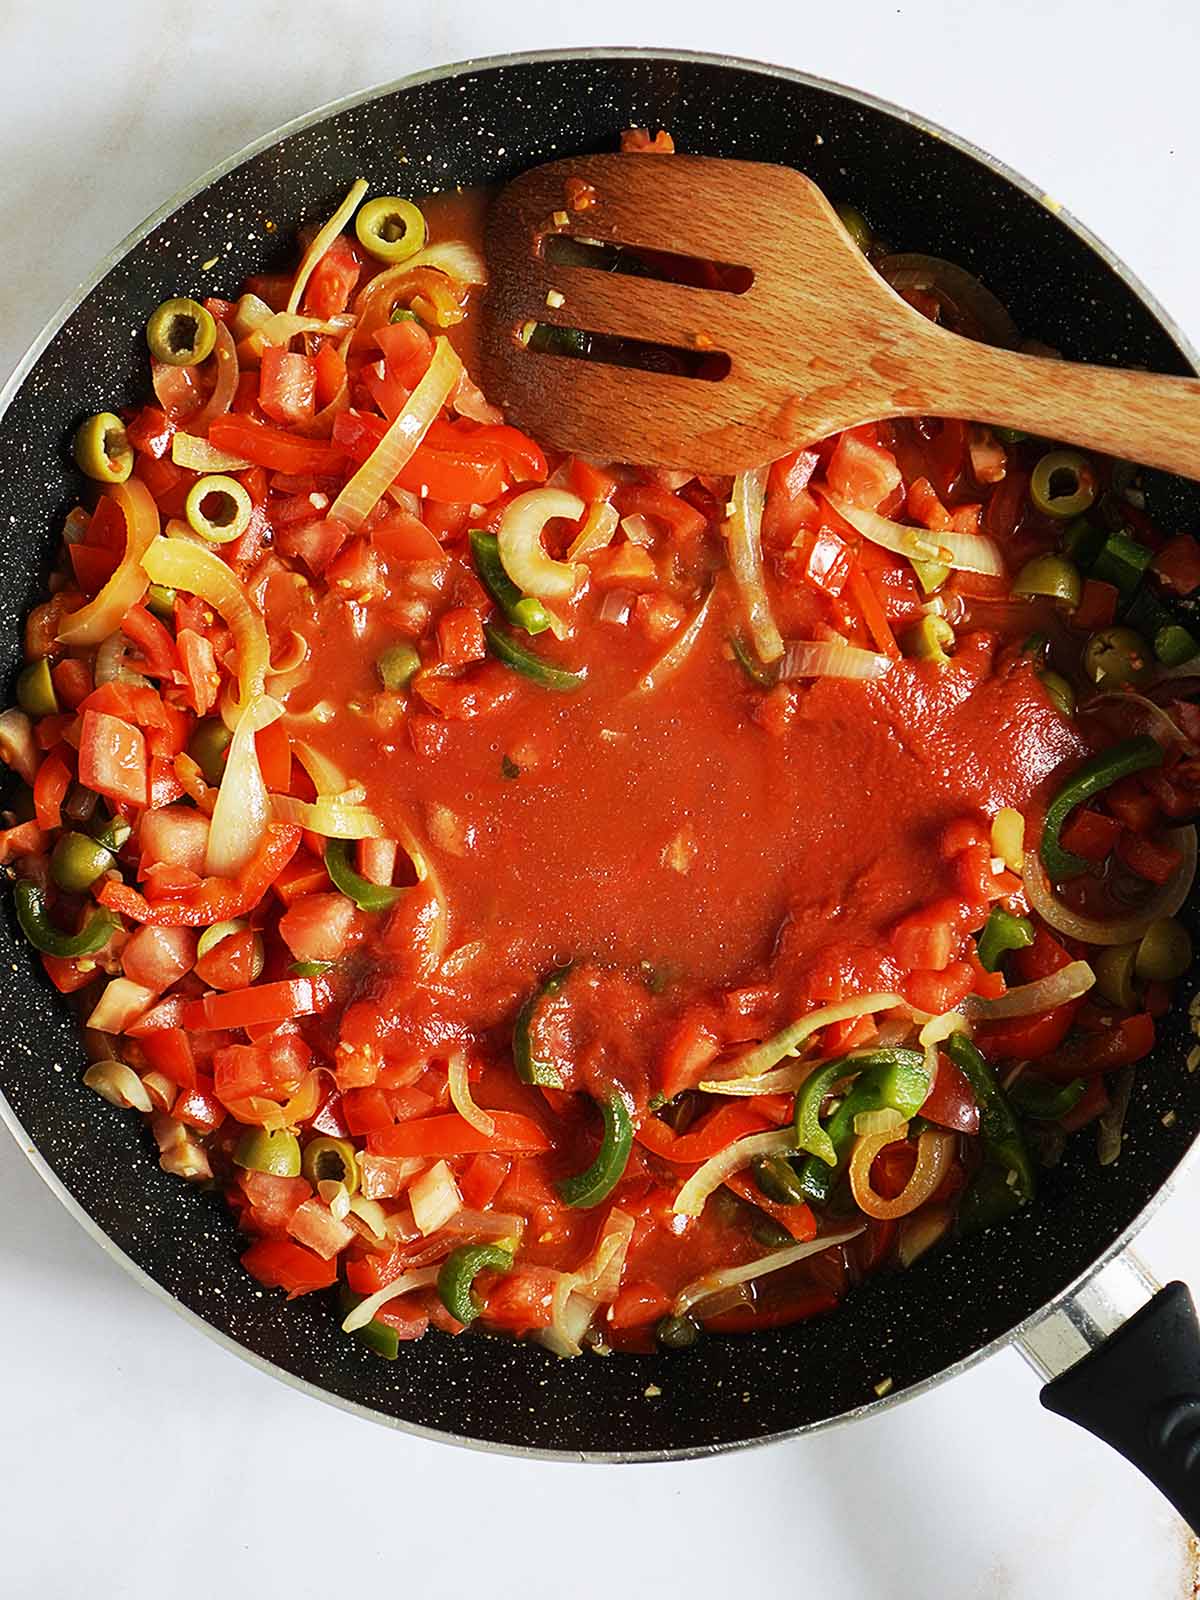 A large skillet with tomato sauce, onions, peppers with a wooden spoon.